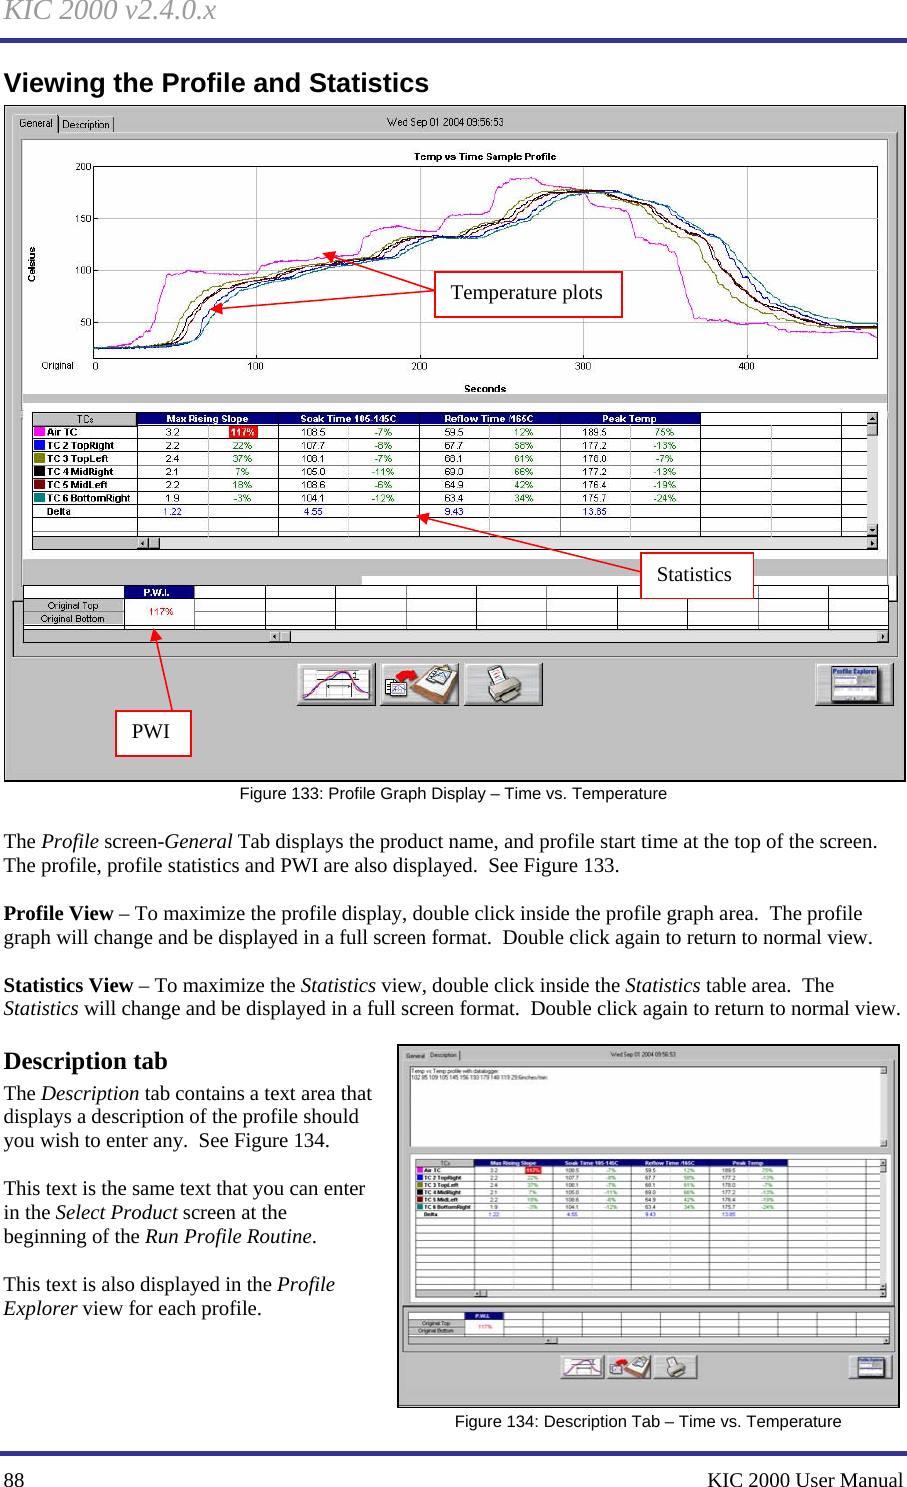 KIC 2000 v2.4.0.x 88    KIC 2000 User Manual Viewing the Profile and Statistics  Figure 133: Profile Graph Display – Time vs. Temperature  The Profile screen-General Tab displays the product name, and profile start time at the top of the screen.  The profile, profile statistics and PWI are also displayed.  See Figure 133.    Profile View – To maximize the profile display, double click inside the profile graph area.  The profile graph will change and be displayed in a full screen format.  Double click again to return to normal view.  Statistics View – To maximize the Statistics view, double click inside the Statistics table area.  The Statistics will change and be displayed in a full screen format.  Double click again to return to normal view. Description tab The Description tab contains a text area that displays a description of the profile should you wish to enter any.  See Figure 134.    This text is the same text that you can enter in the Select Product screen at the beginning of the Run Profile Routine.  This text is also displayed in the Profile Explorer view for each profile.      Figure 134: Description Tab – Time vs. Temperature Temperature plots Statistics PWI 